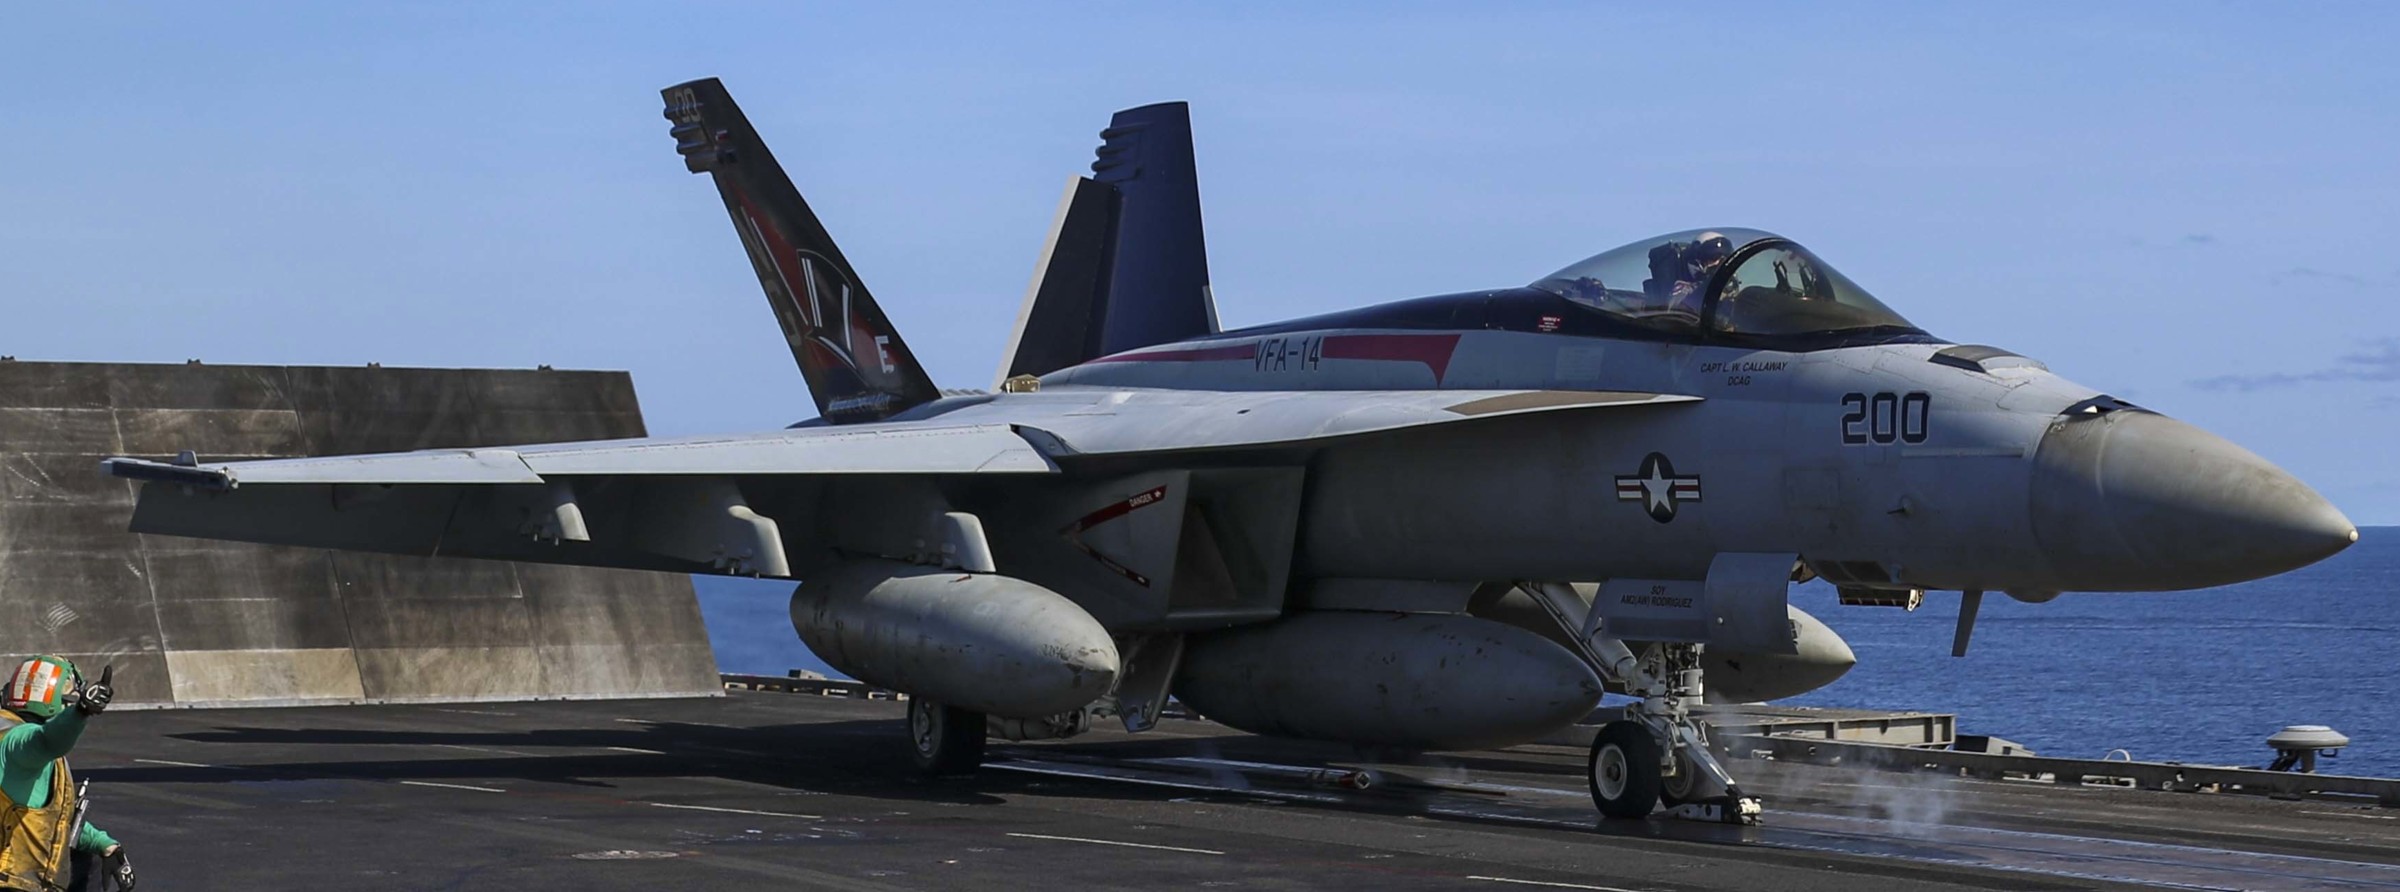 vfa-14 tophatters strike fighter squadron f/a-18e super hornet cvn-72 uss abraham lincoln cvw-9 us navy 67